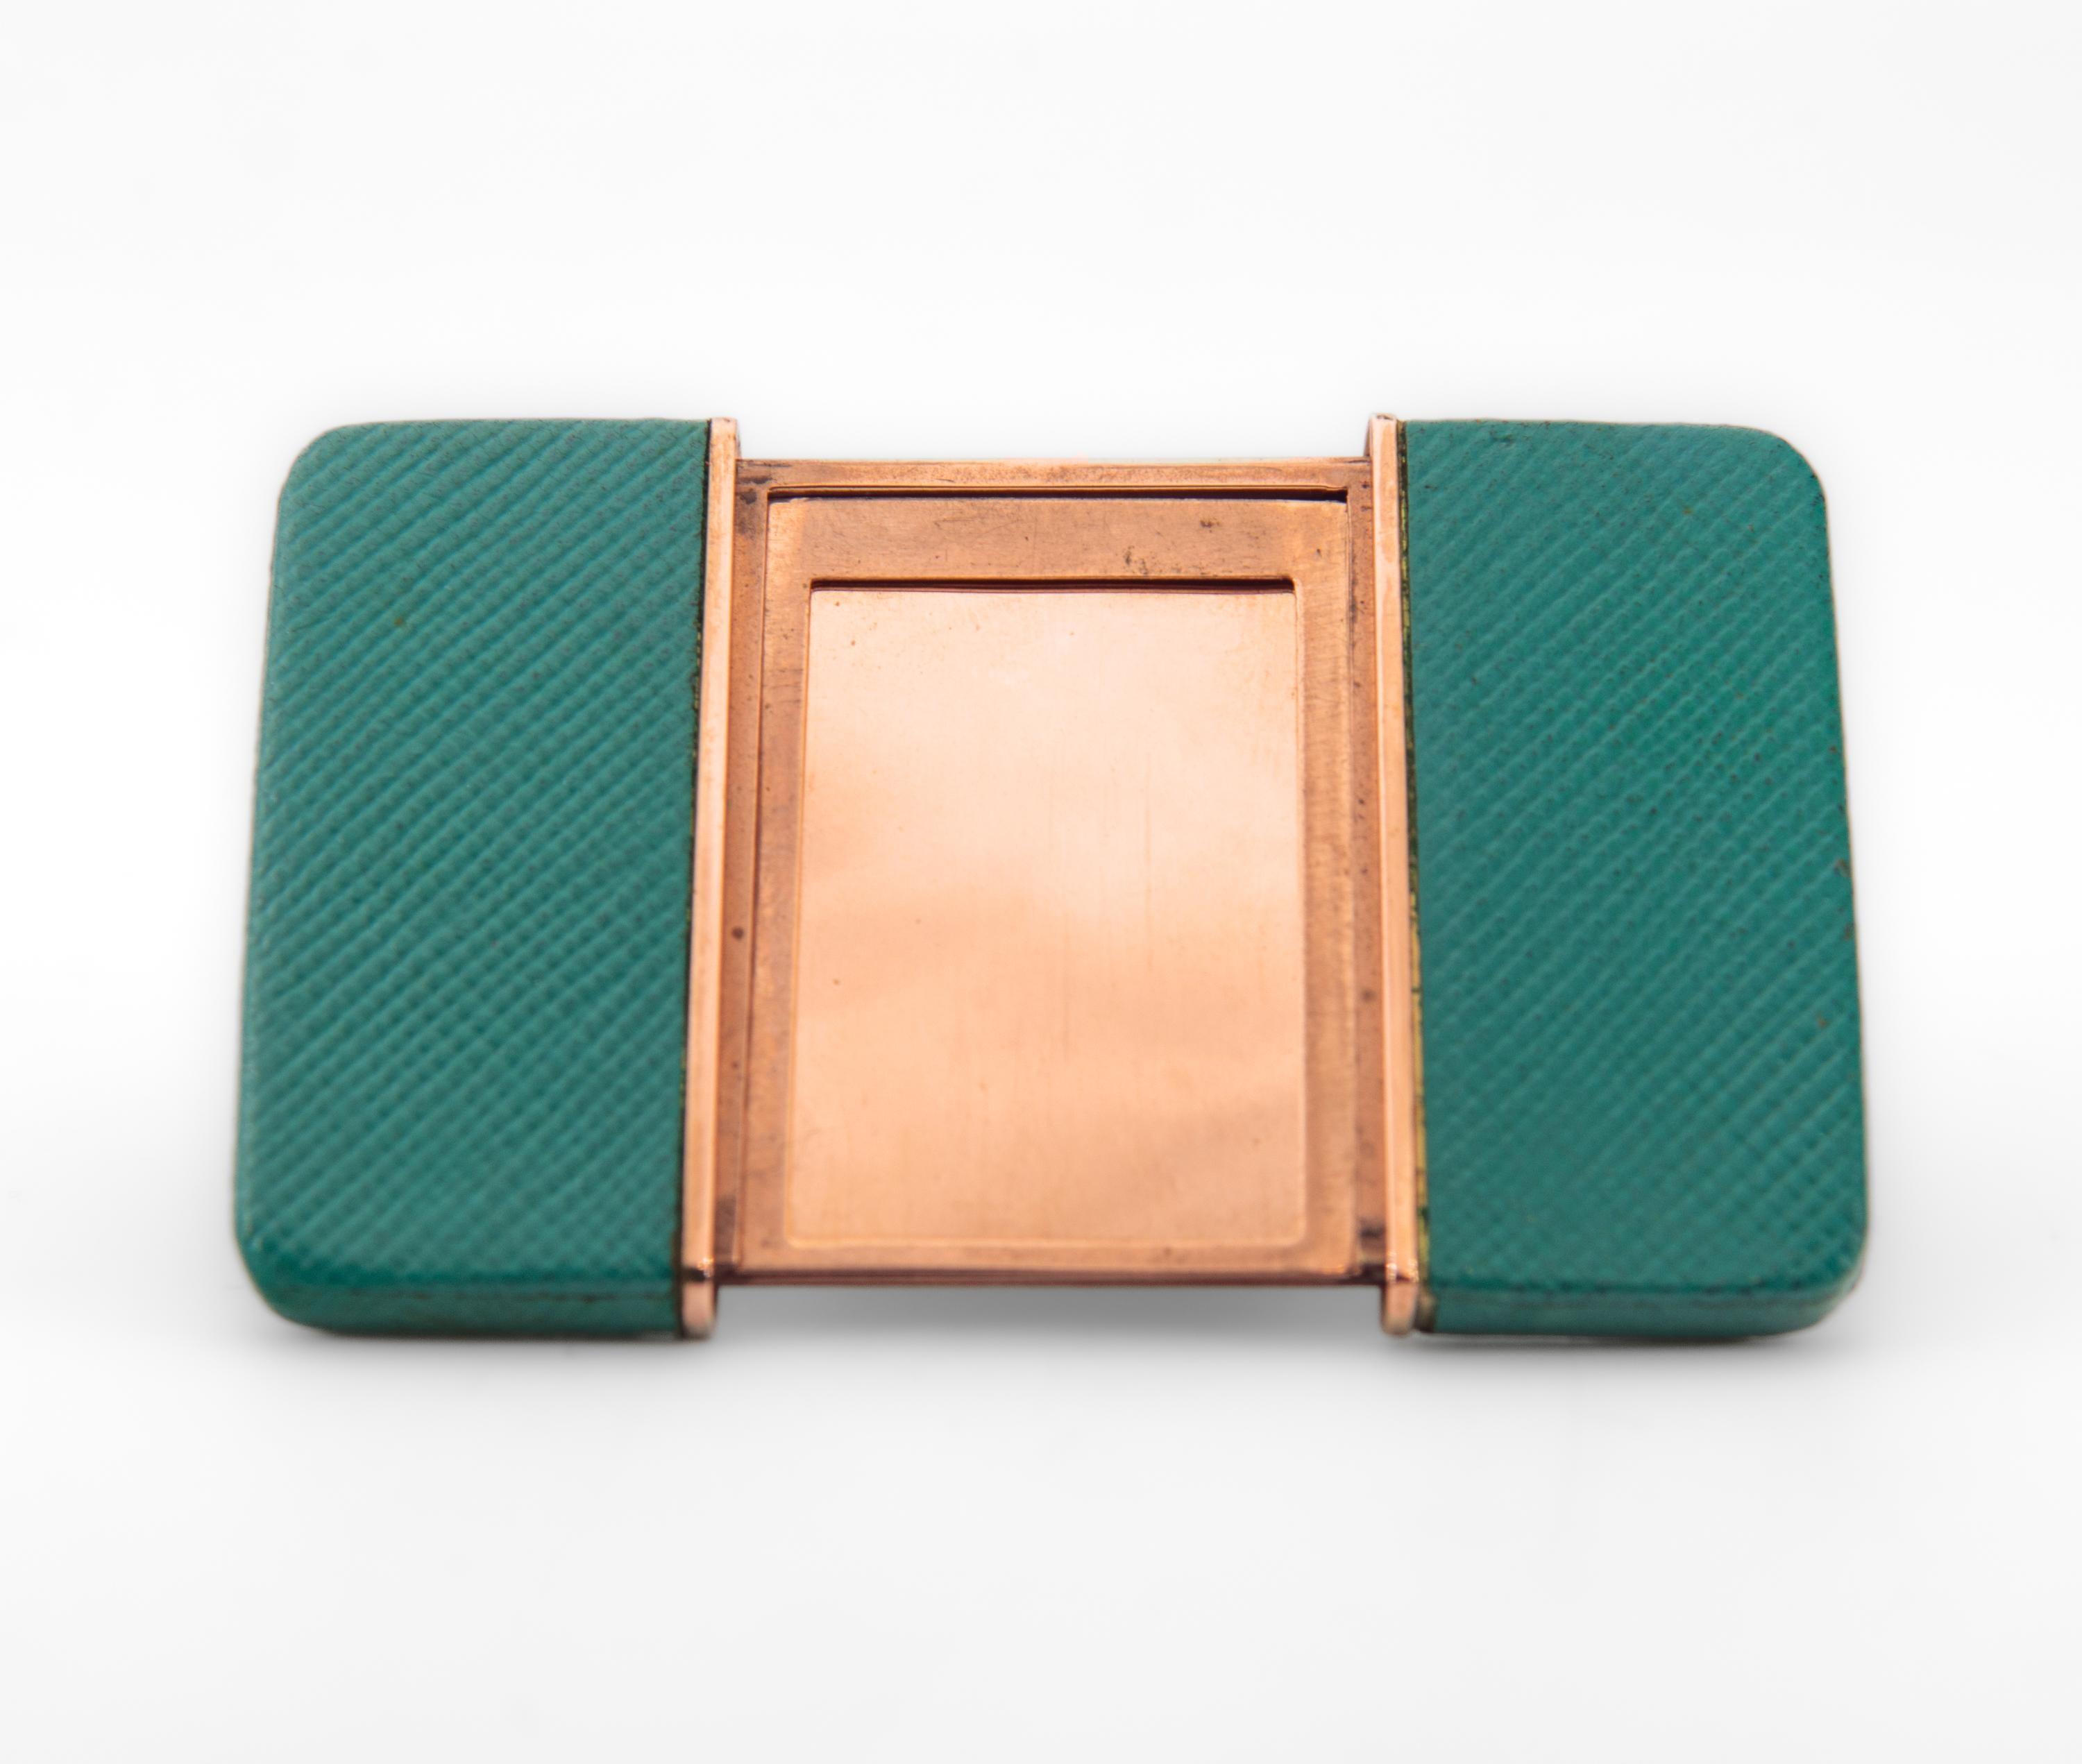 A rare Art Deco period miniature travel leather and rose gold toned picture frame. Stamped: S.T. Dupont Paris. Made in France. Circa 1930.

The picture frame has a pull-out action with easel back. The leather is in a wonderful sea green colour, a